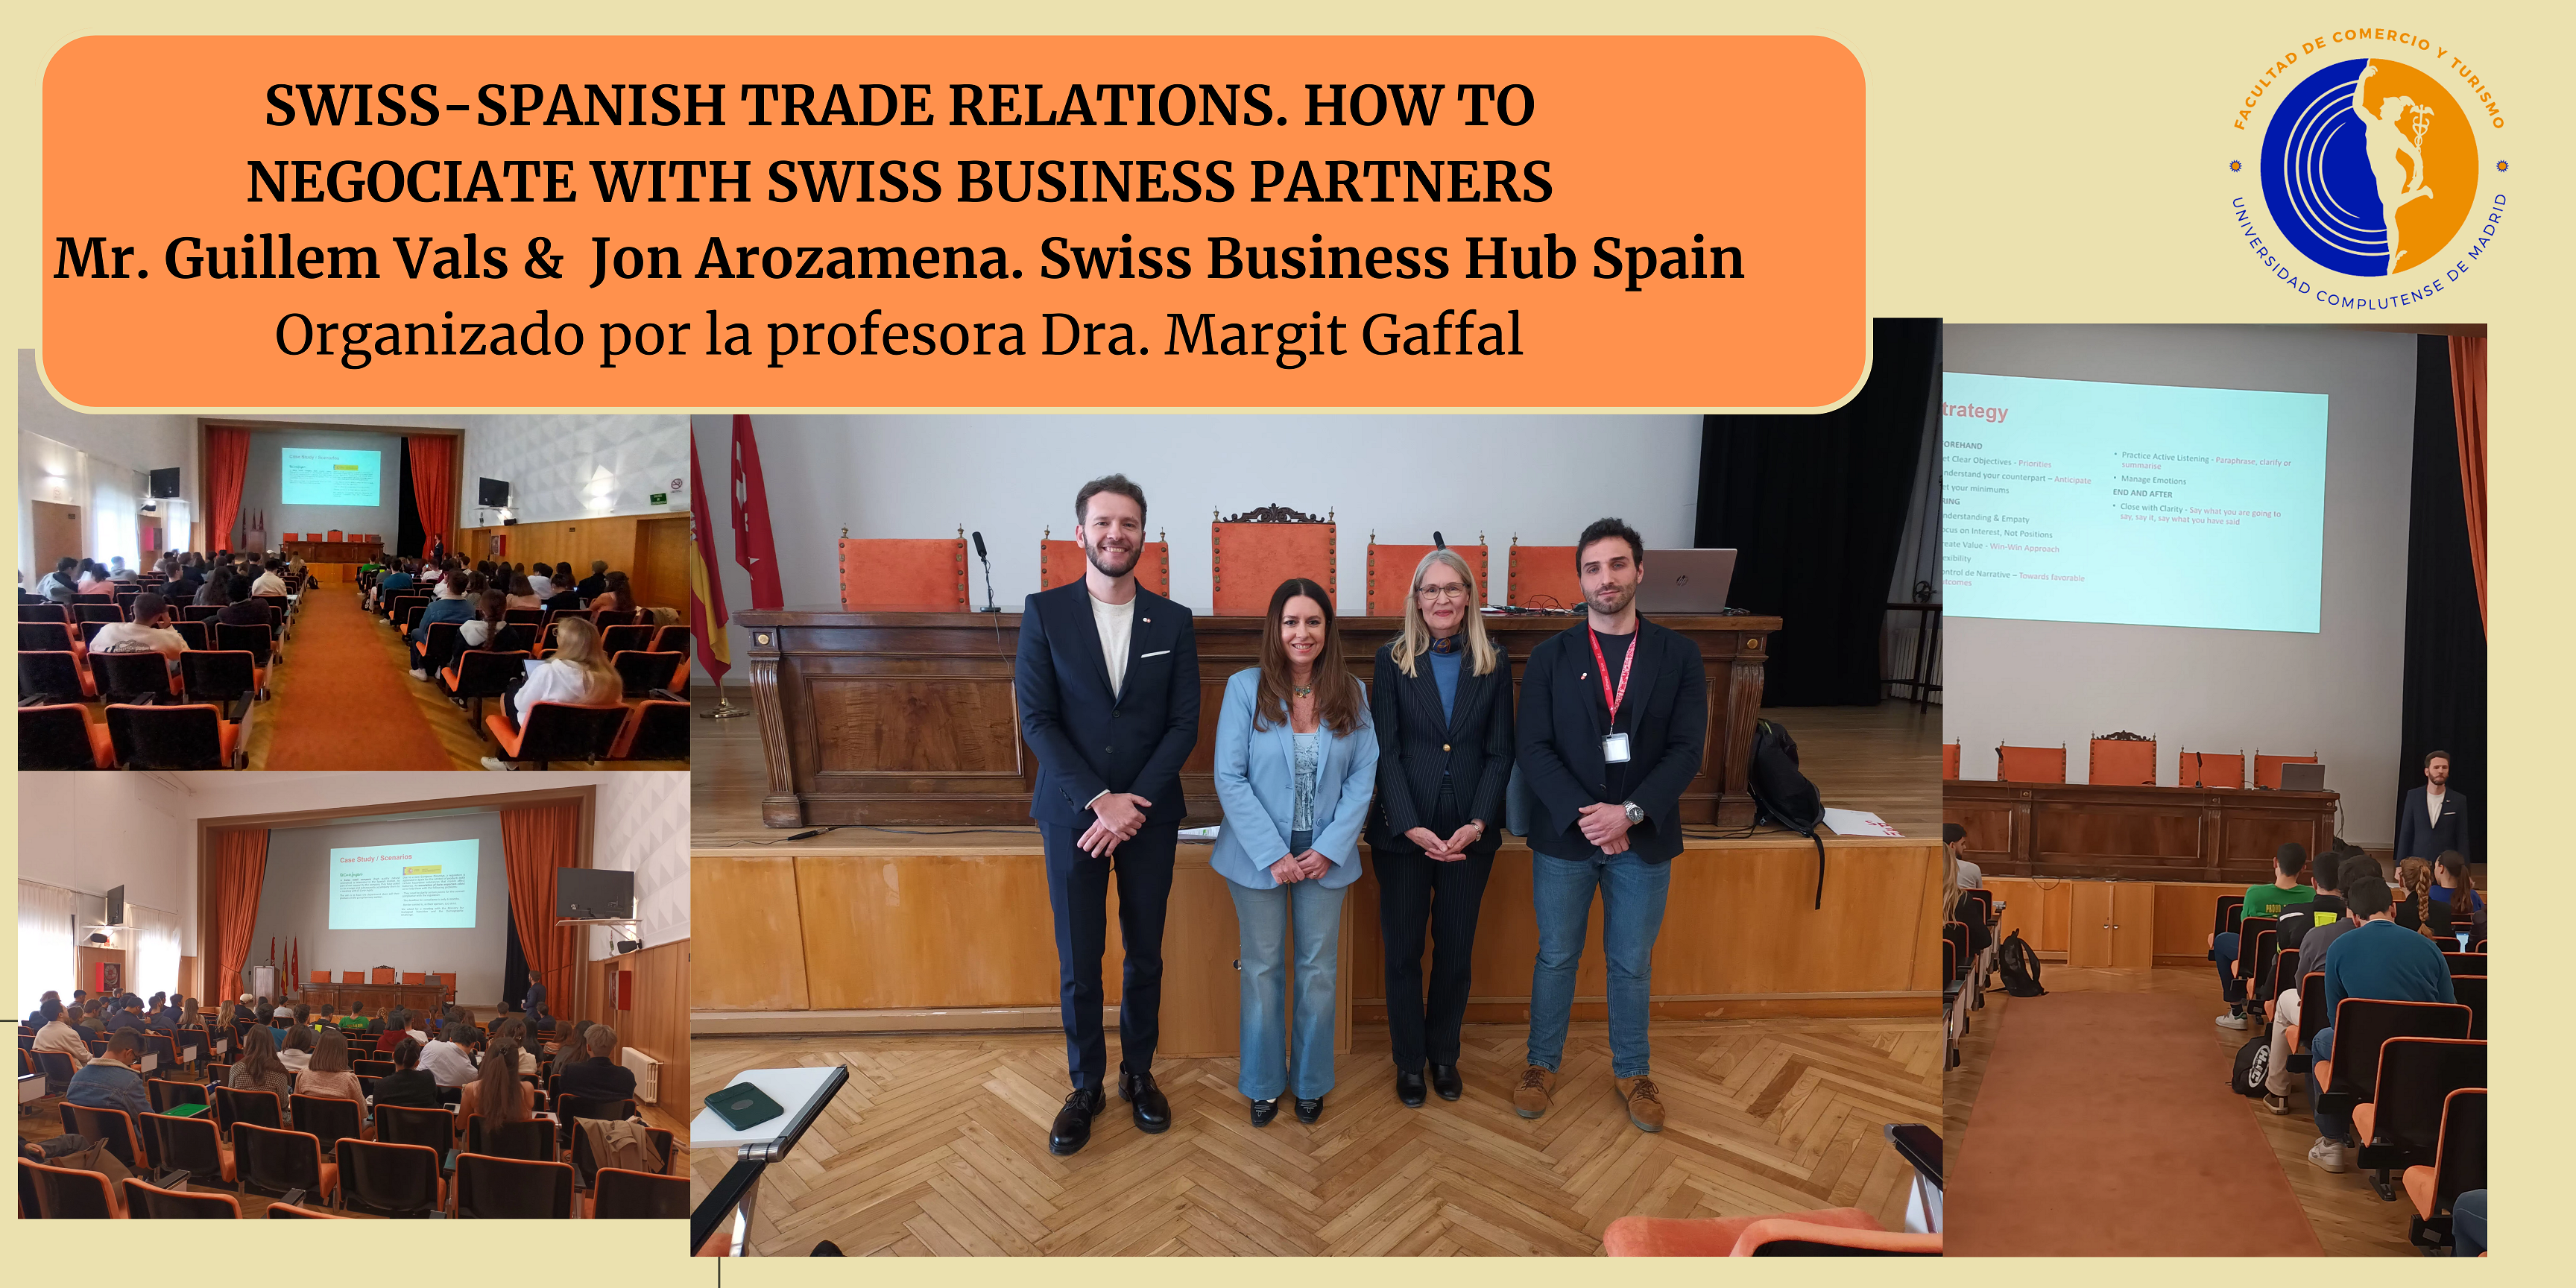 SWISS-SPANISH TRADE RELATIONS. HOW TO NEGOCIATE WITH SWISS BUSINESS PARTNERS